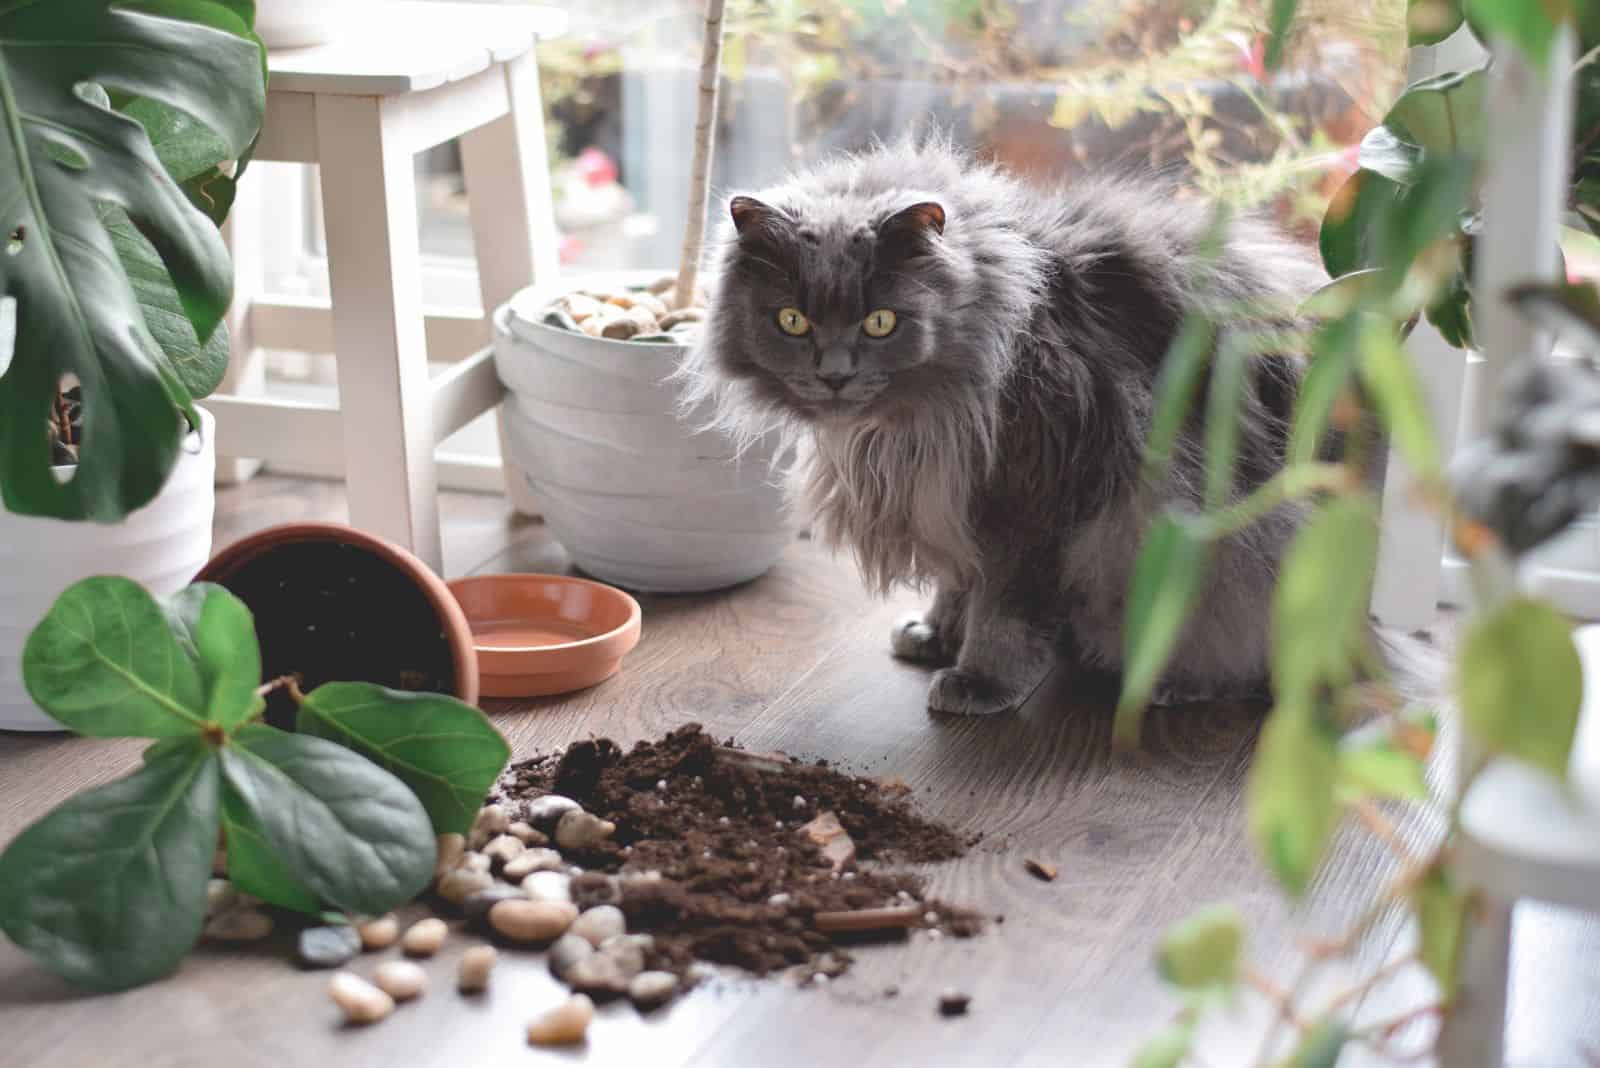 photo of a cat and a knocked down house plant